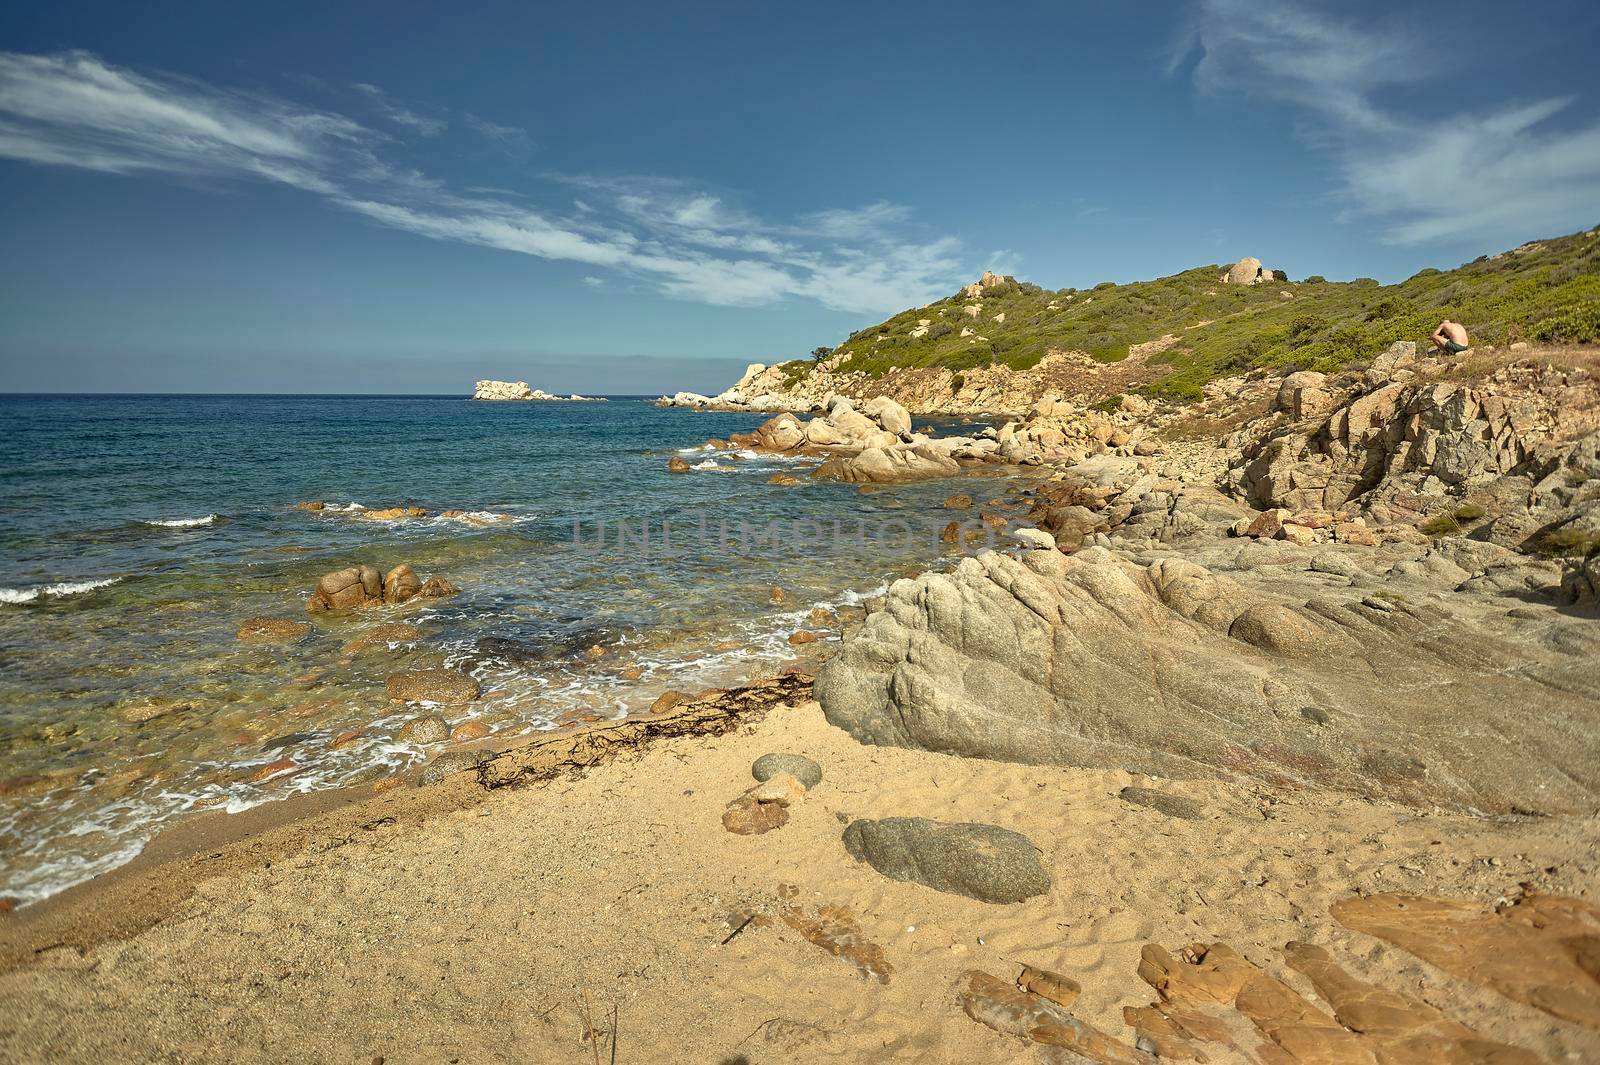 Beautiful Mediterranean beach typical of the coast of southern Sardinia taken over in summer.